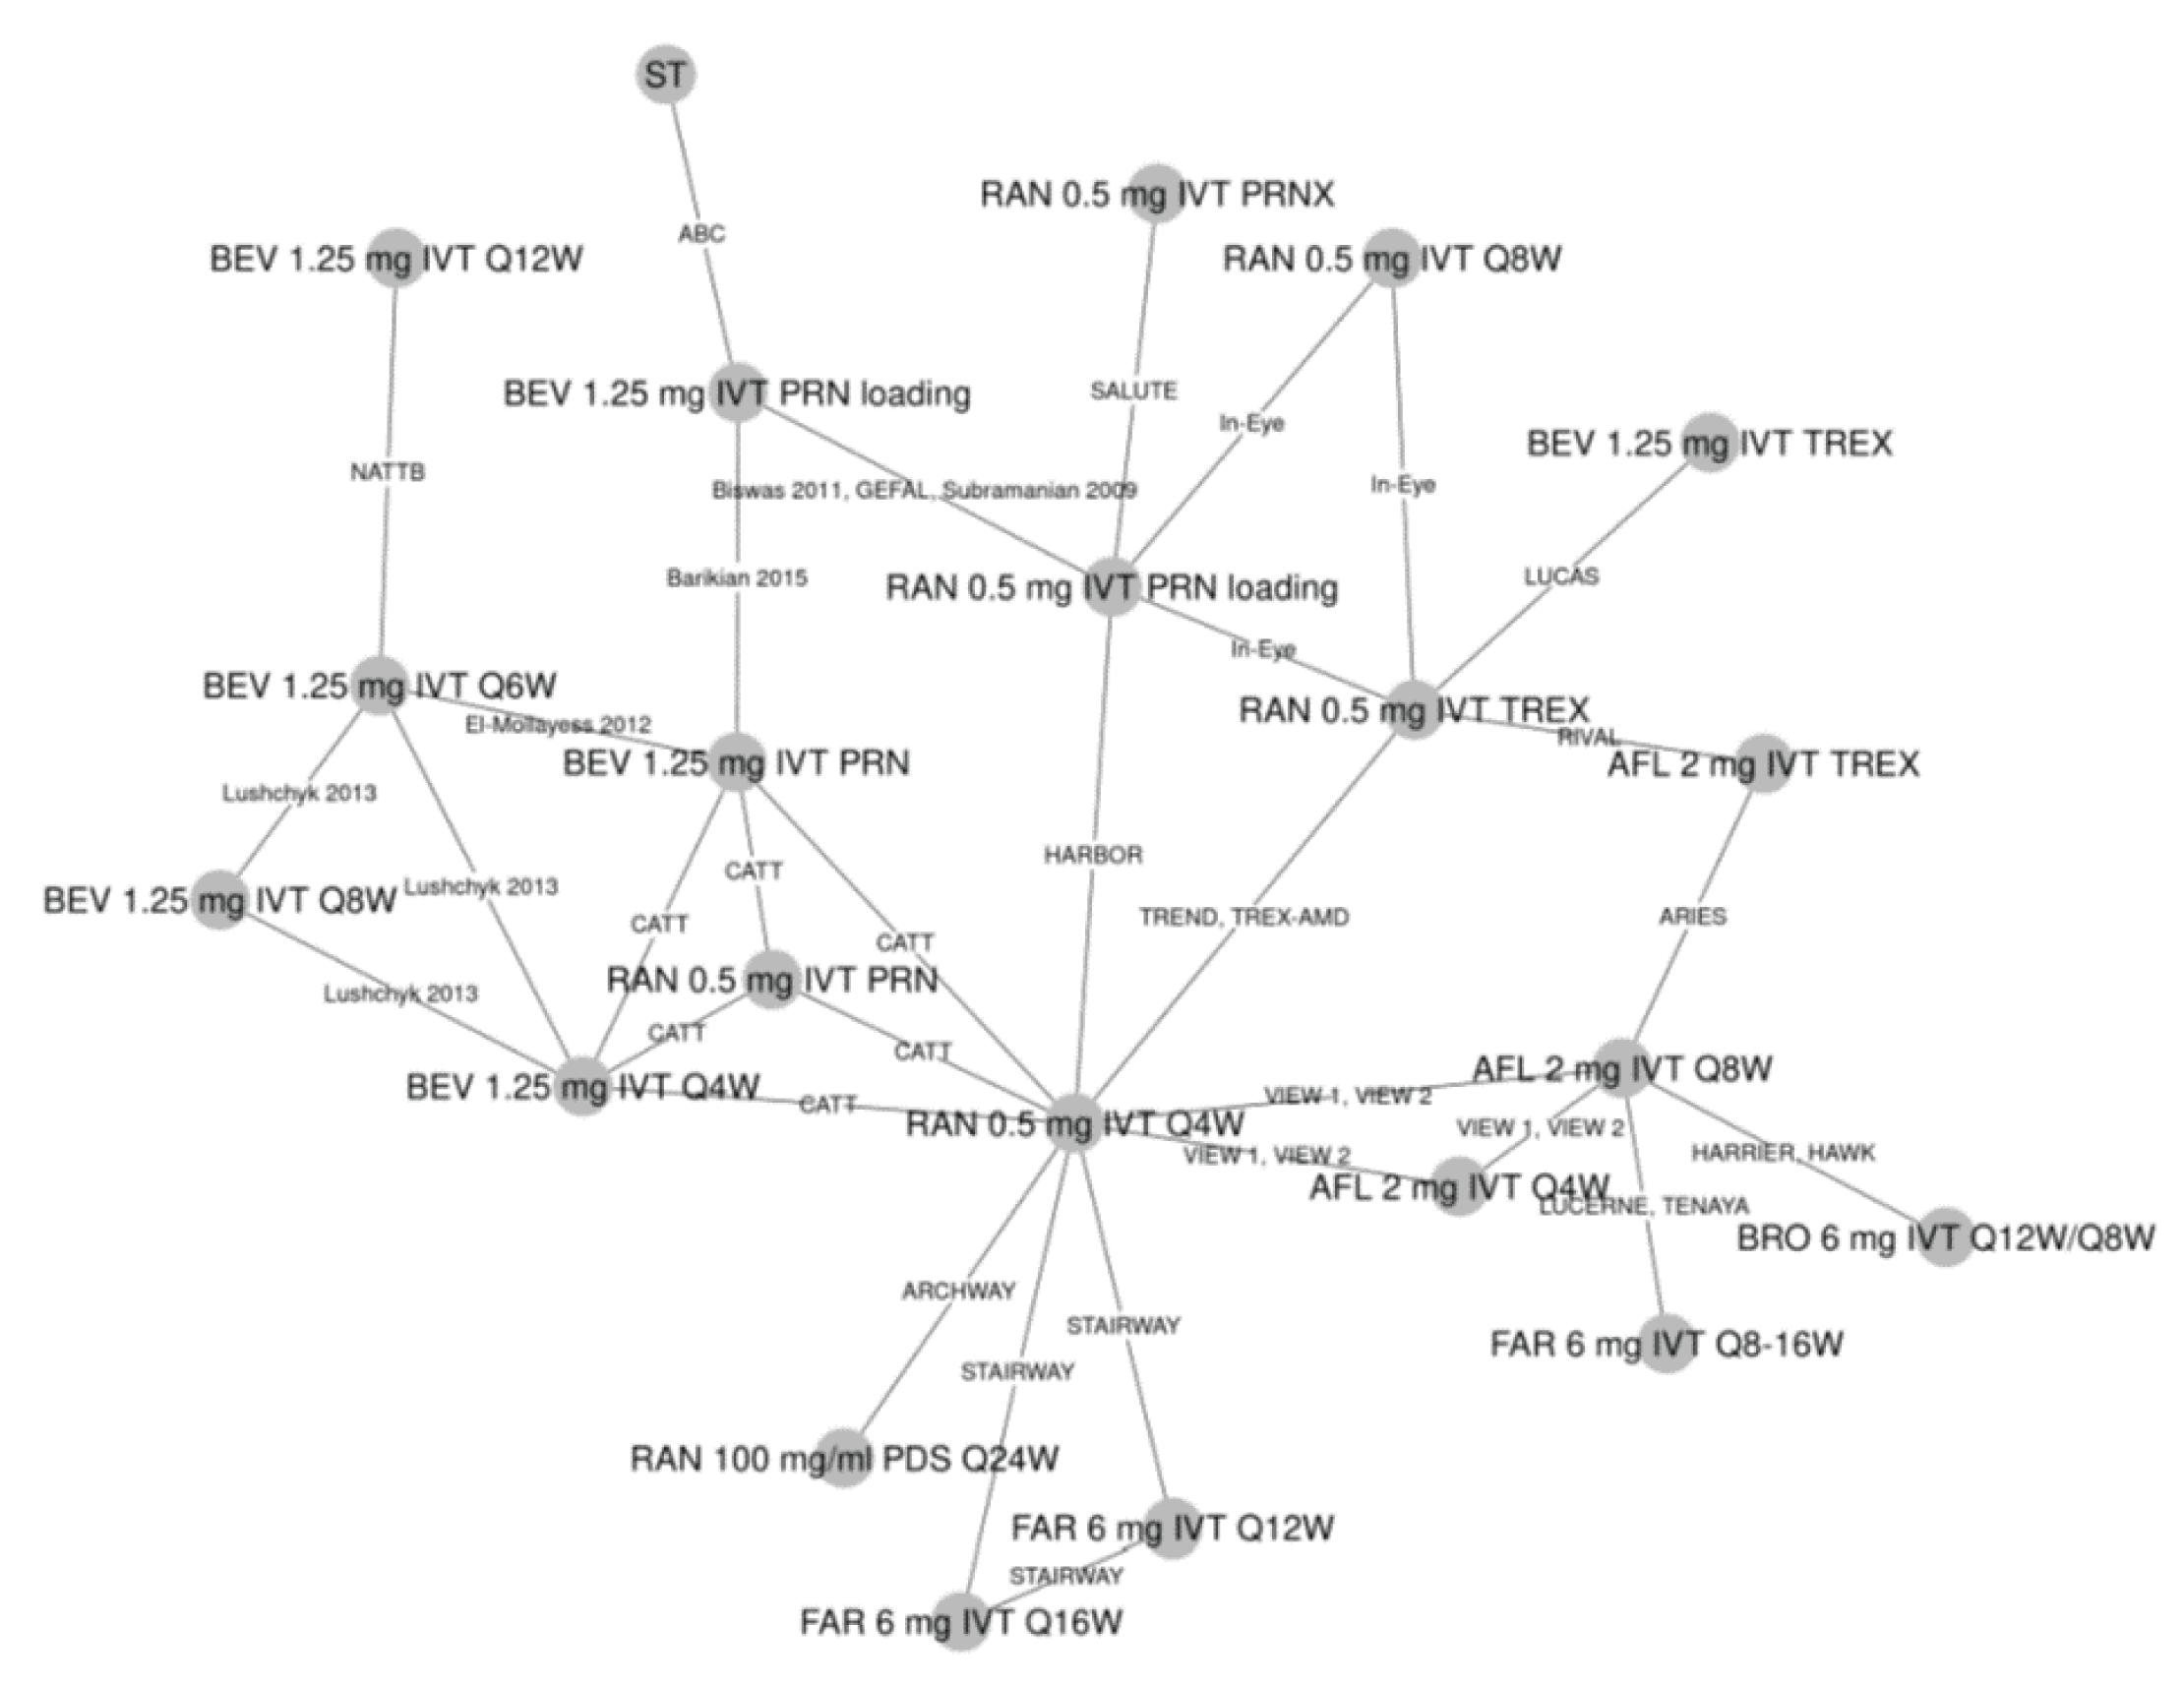 25 trials reported on the outcome of retinal thickness (CST) at 12 months and were connected in a network. There are several connected star diagrams with 5 or more connections: BEV 1.25 mg IVT every 4 weeks, RAN 0.5 mg IVT every 4 weeks, AFL 2 mg IVT every 8 weeks, RAN 0.5 mg IVT TREX, BEV 1.25 mg IVT PRN, and RAN 0.5 mg IVT PRN loading. The most common connection was ranibizumab 0.5 mg IVT every 4 weeks. Faricimab was connected to aflibercept through the TENAYA and LUCERNE trials and connected to ranibizumab 0.5 mg IVT every 4 weeks through the STAIRWAY trial.